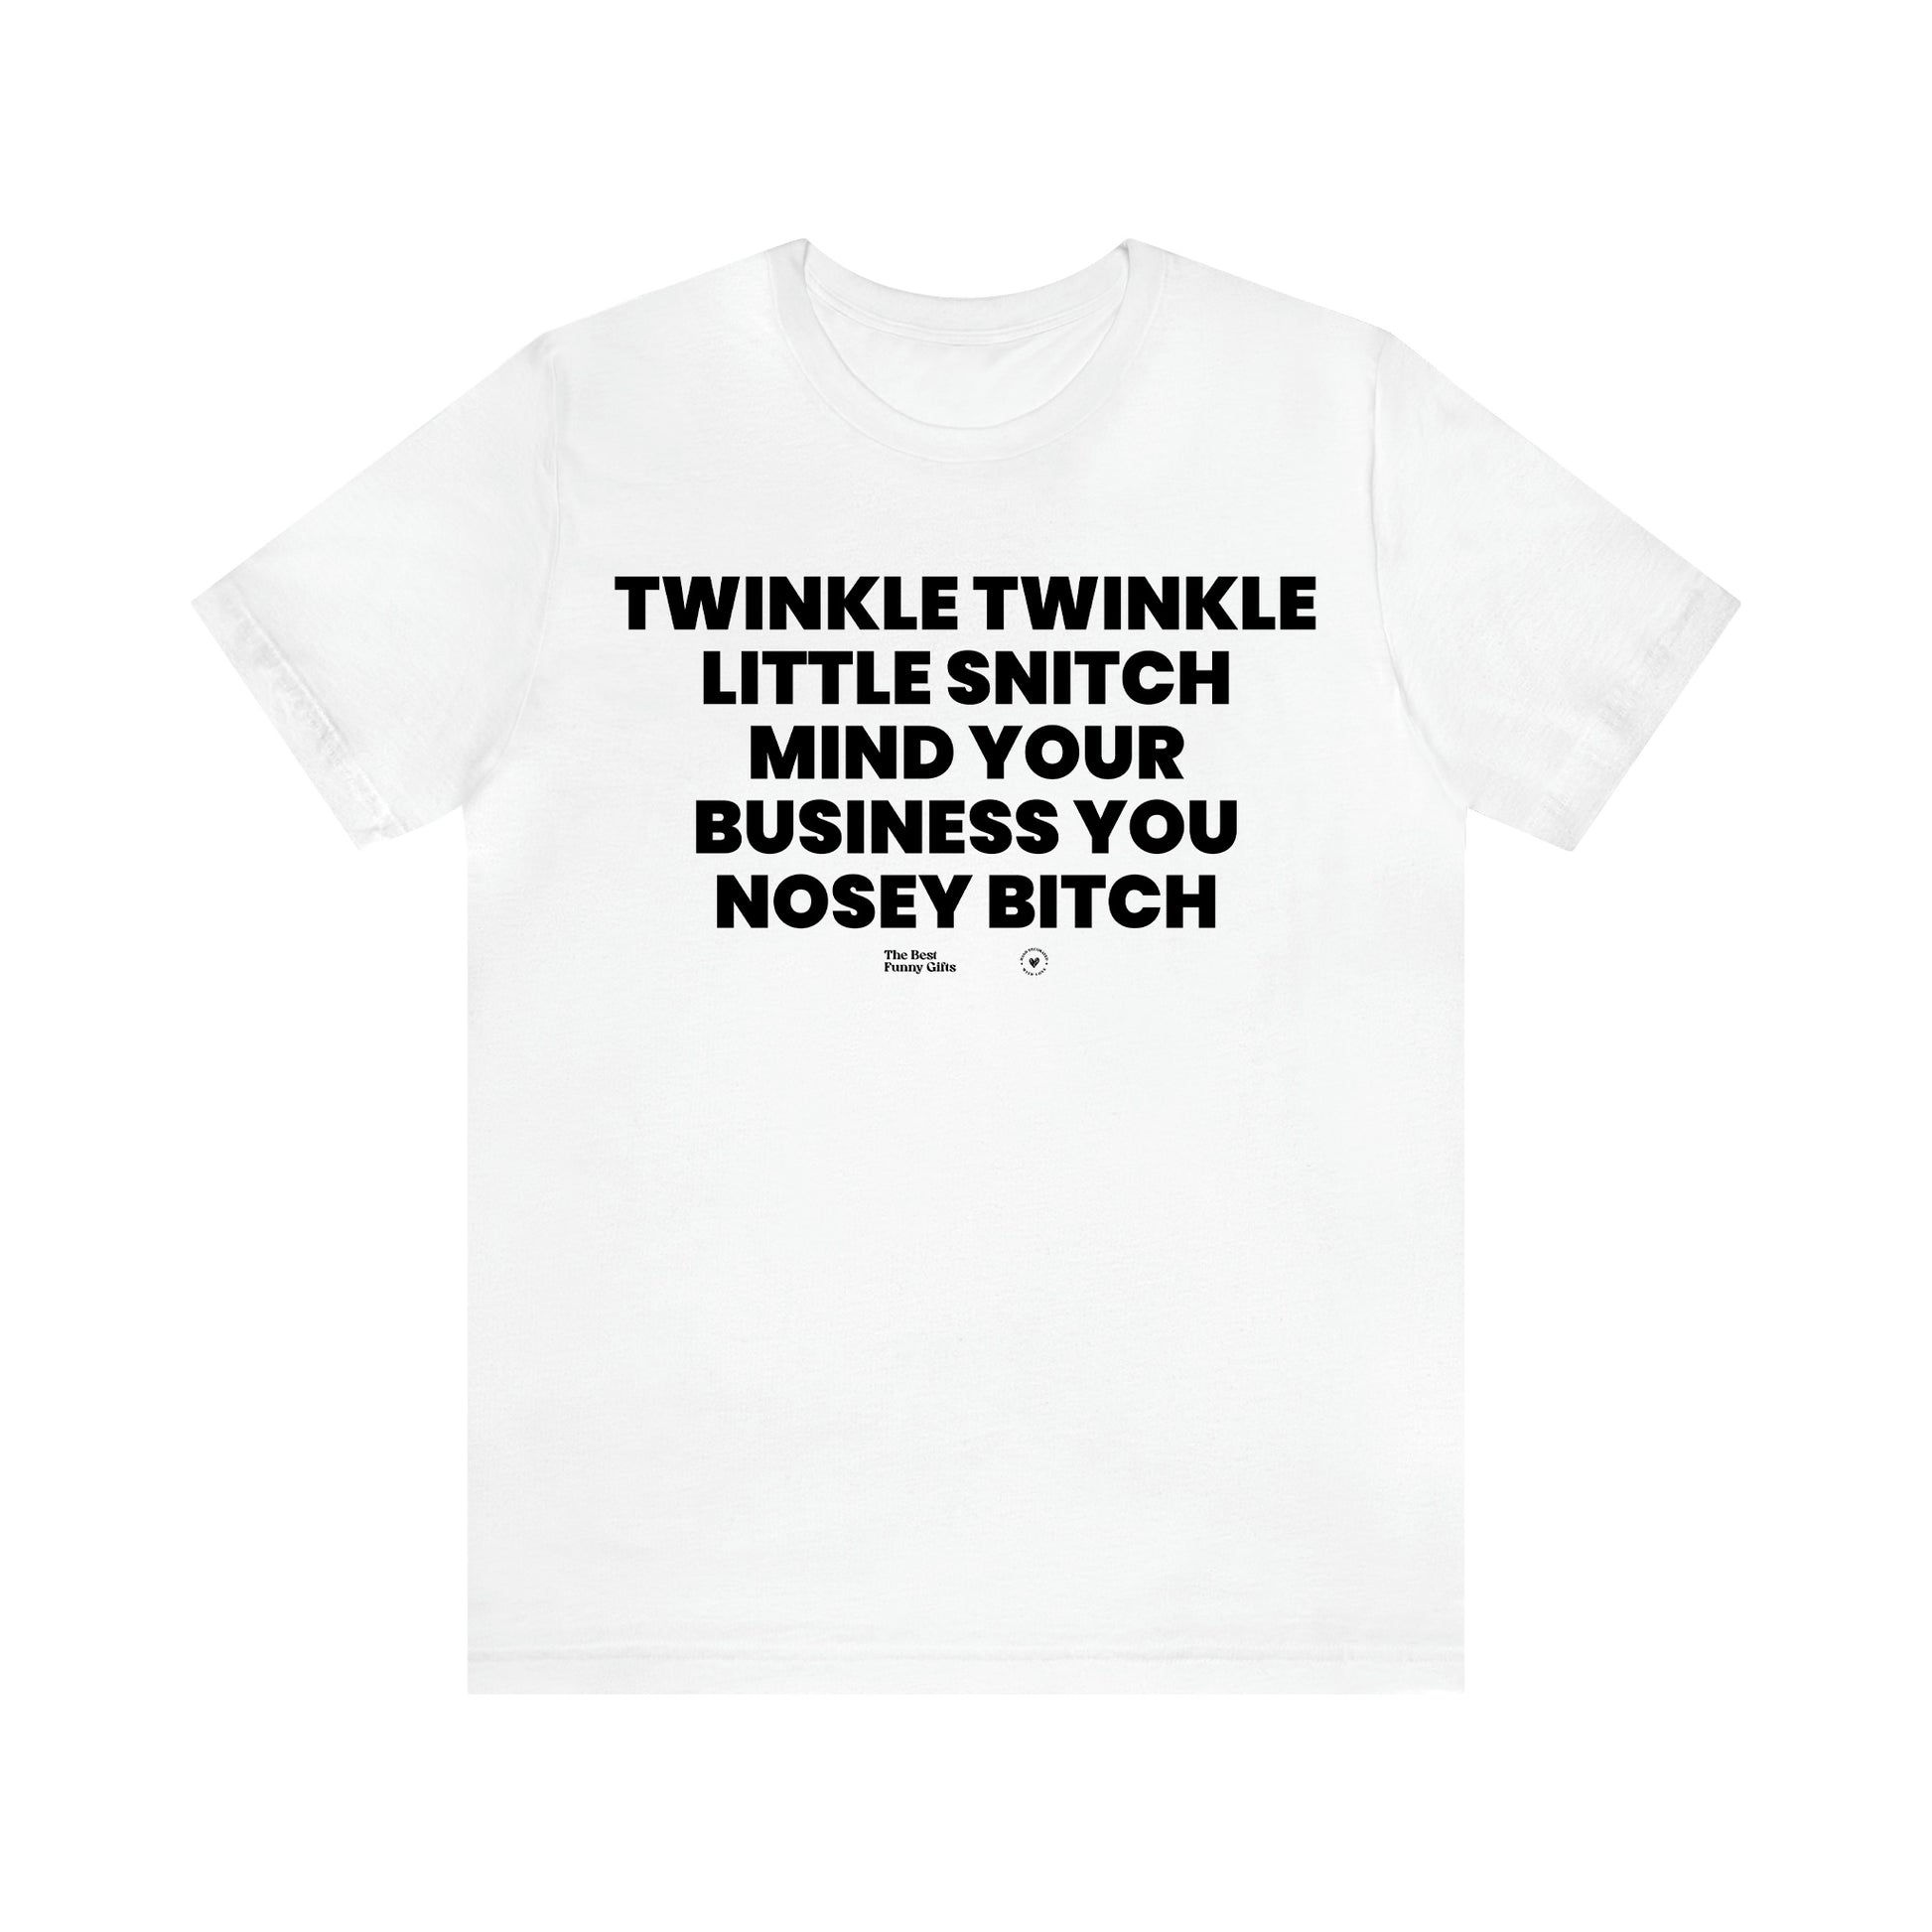 Men's T Shirts Twinkle Twinkle Little Snitch Mind Your Business You Nosey Bitch - The Best Funny Gifts